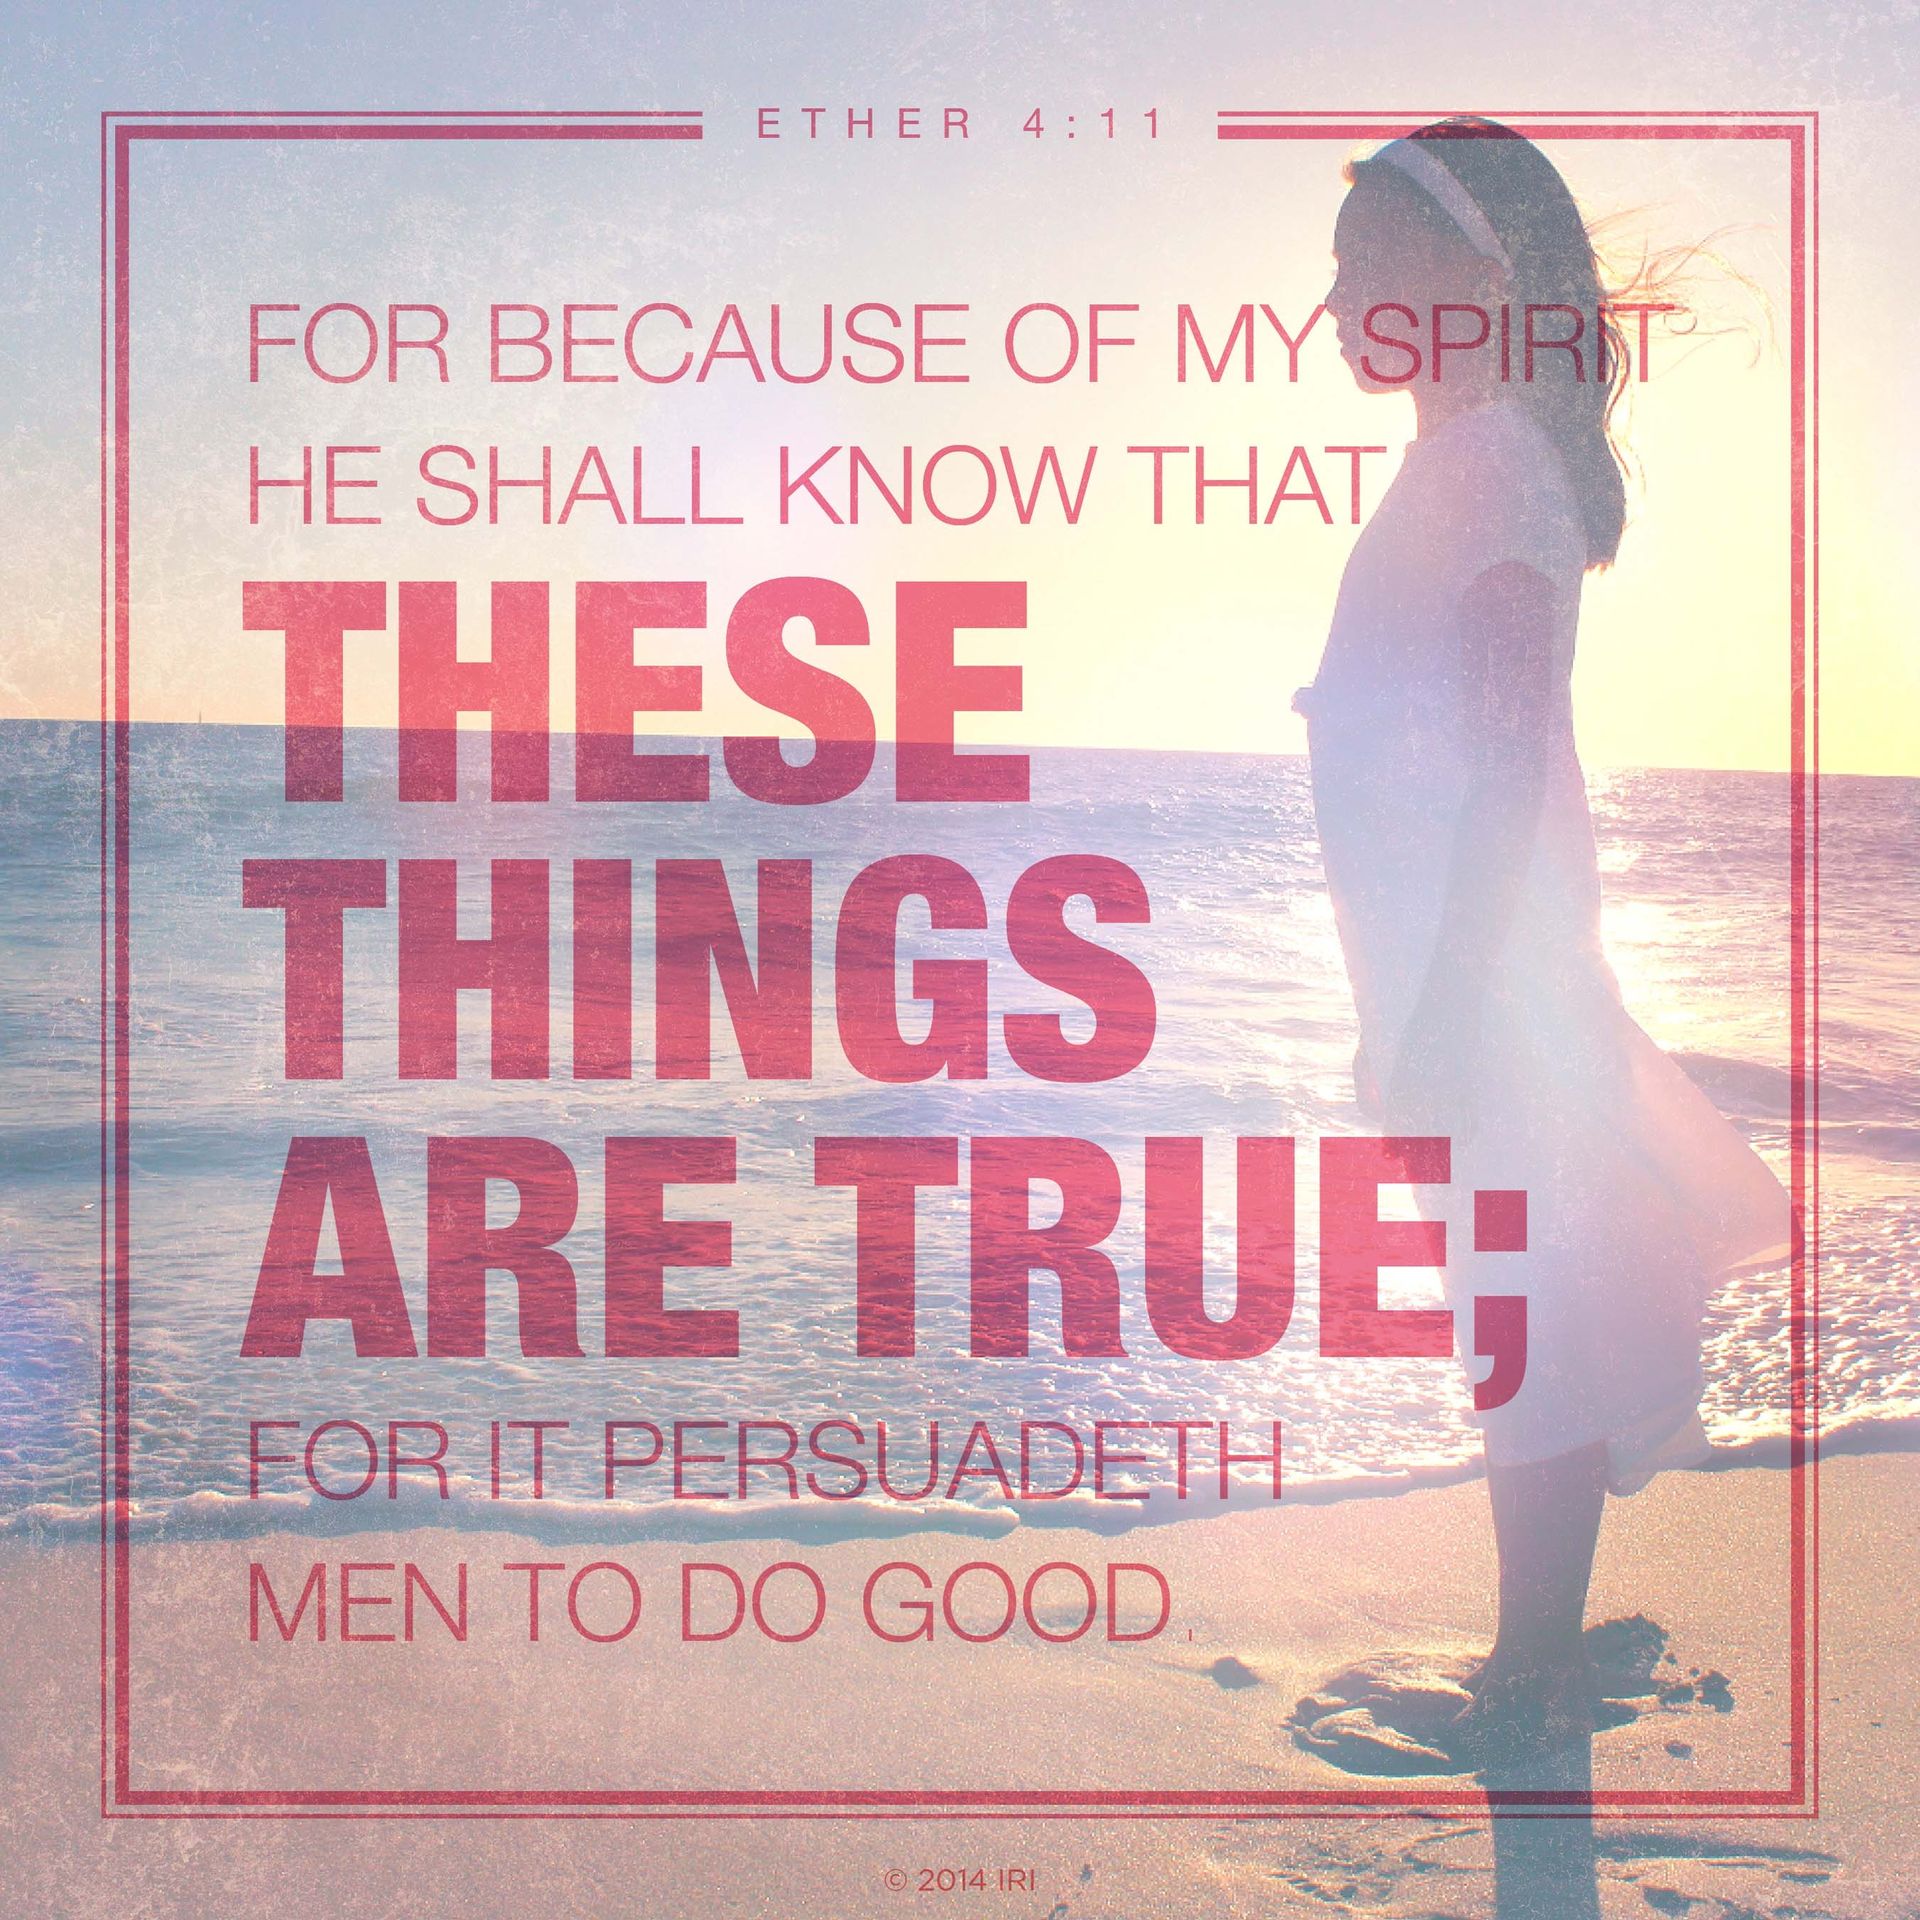 “For because of my Spirit he shall know that these things are true; for it persuadeth men to do good.”—Ether 4:11